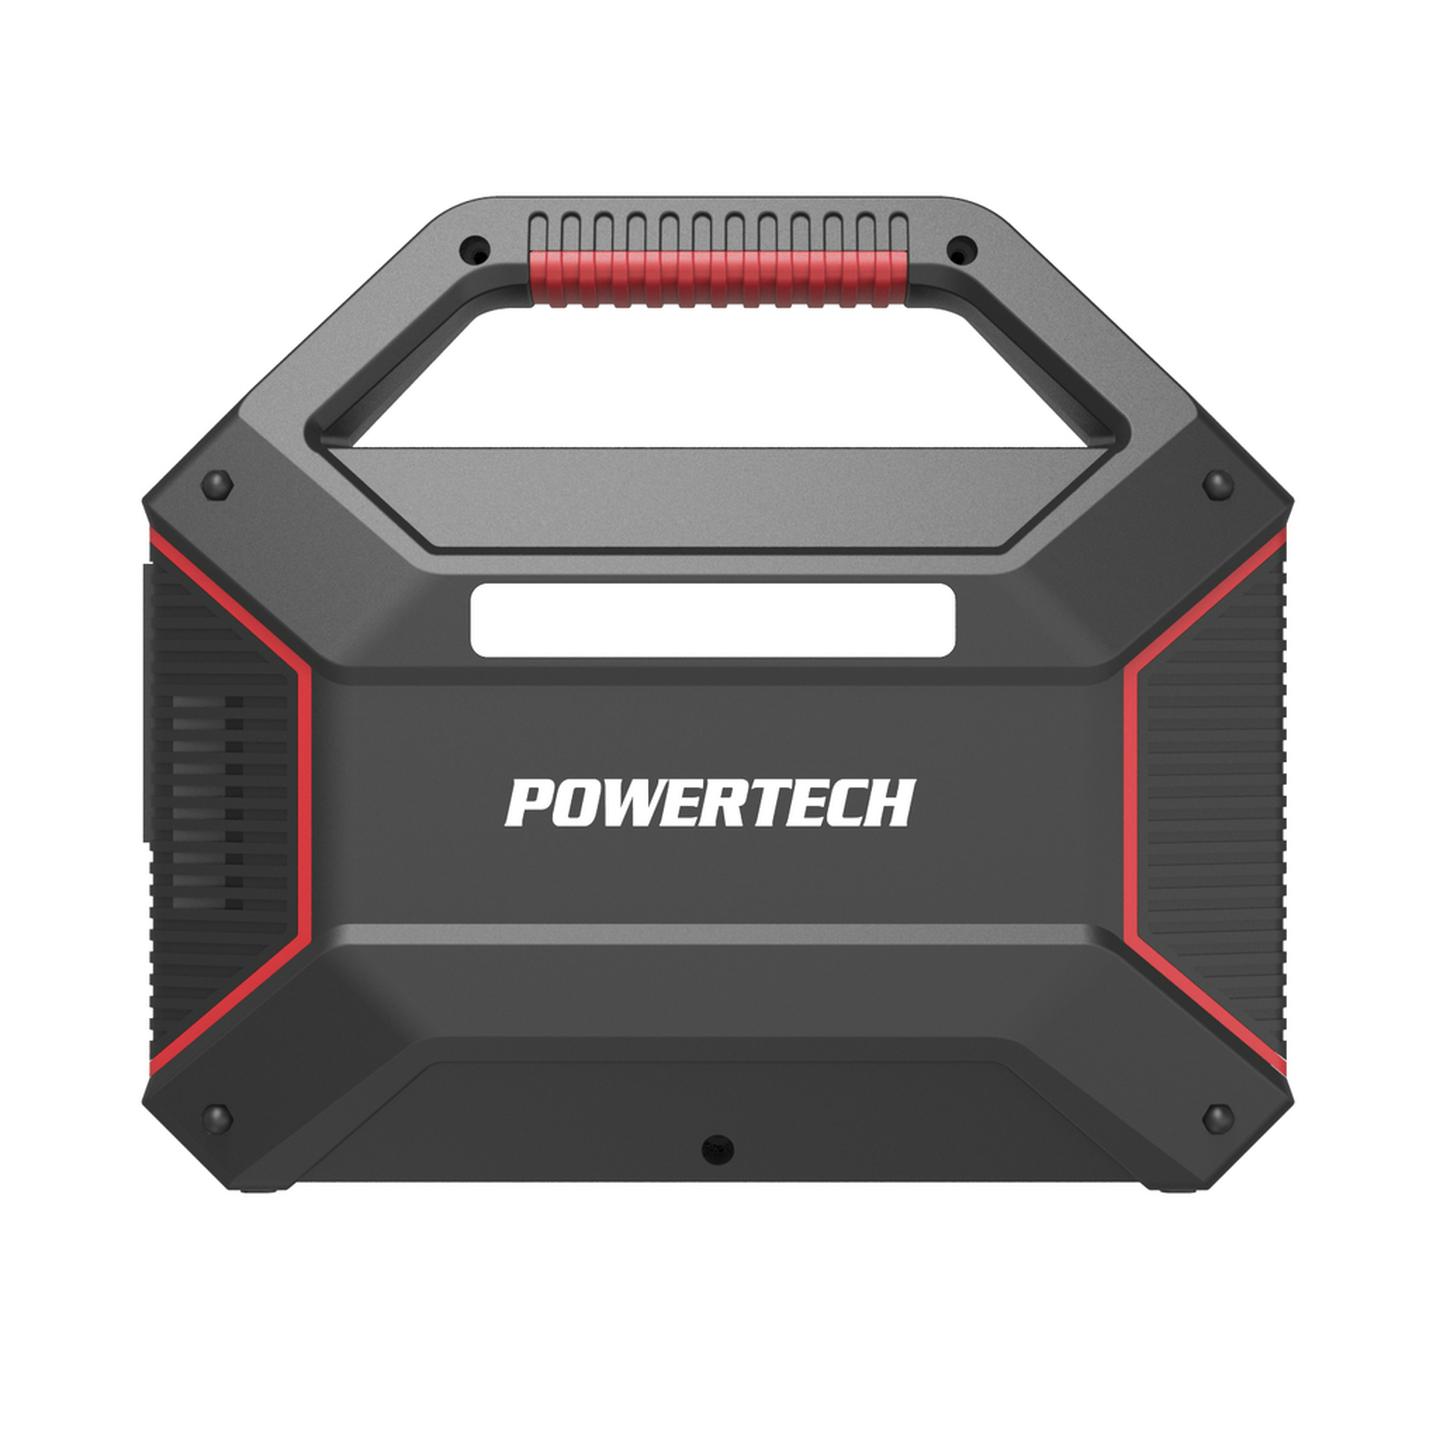 Powertech Portable 155W Power Centre with 100W Inverter and Digital Display